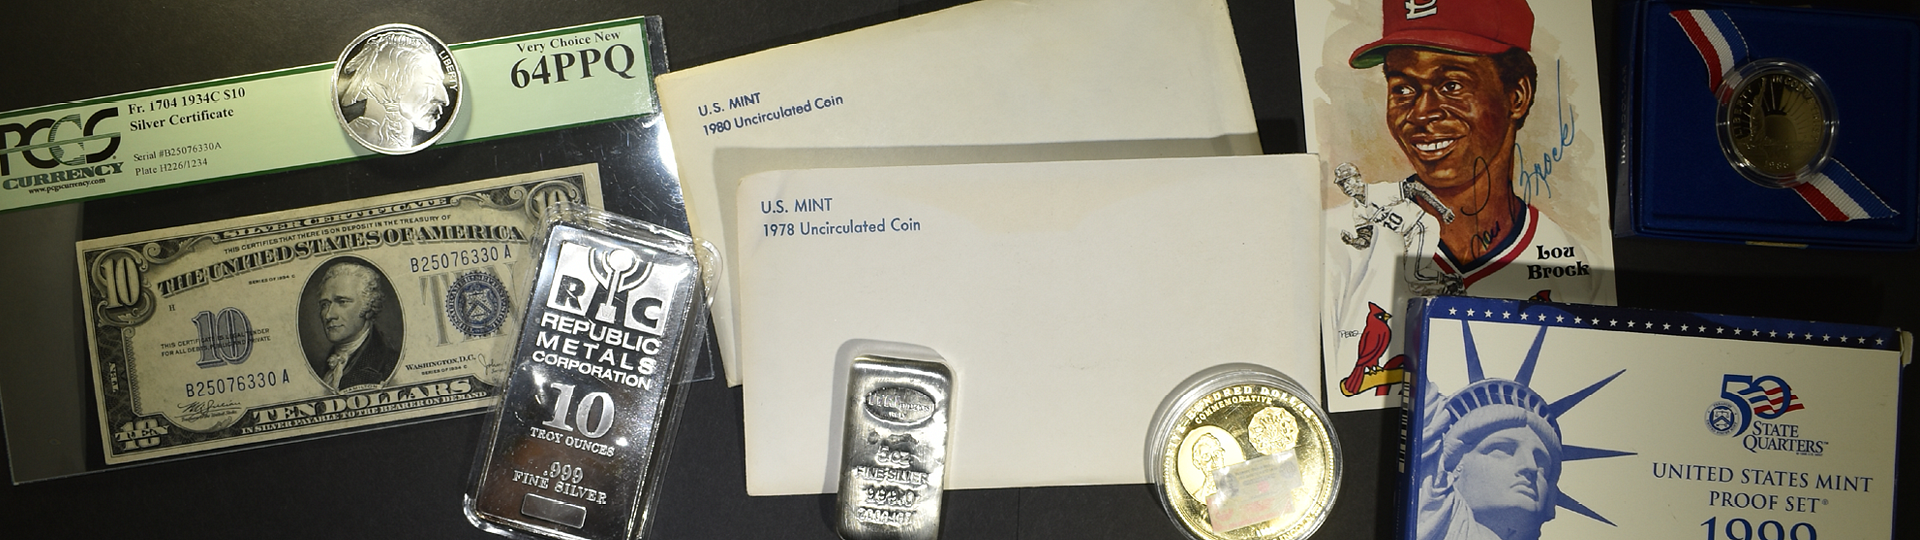 January 30th Silver City Coins & Sports by Silver City Auctions